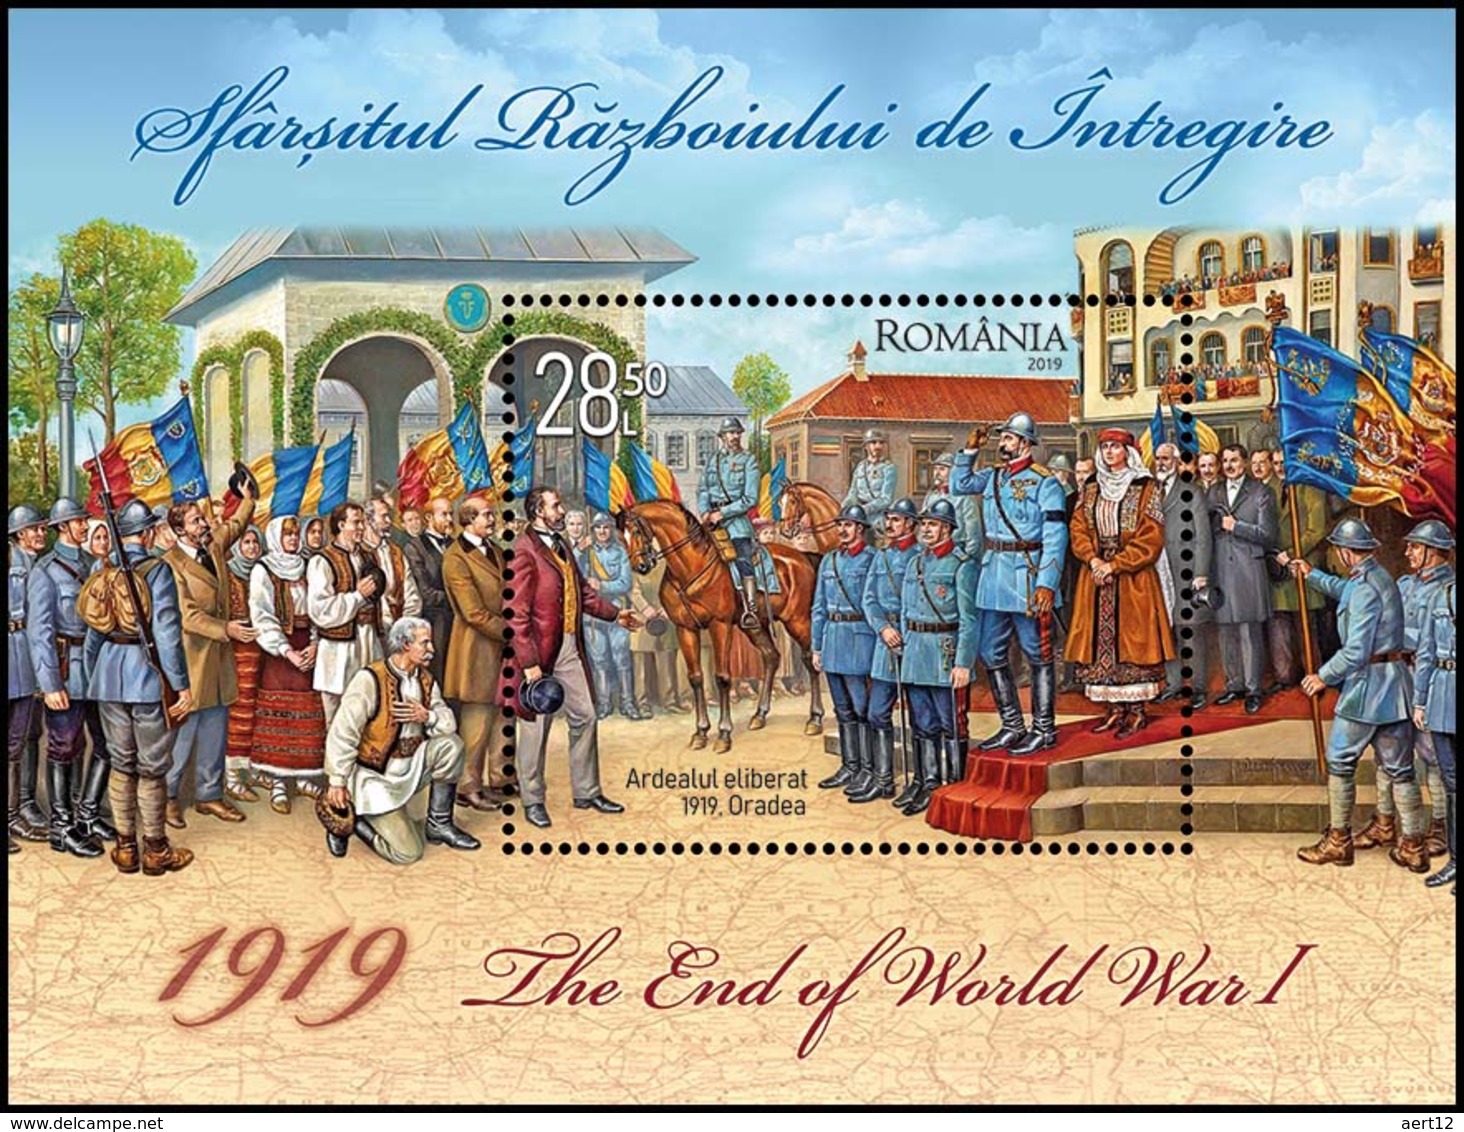 ROMANIA, 2019, 1919, THE END OF WORLD WAR I, Souvenir Sheet, MNH (**); LPMP 2246 - Unused Stamps